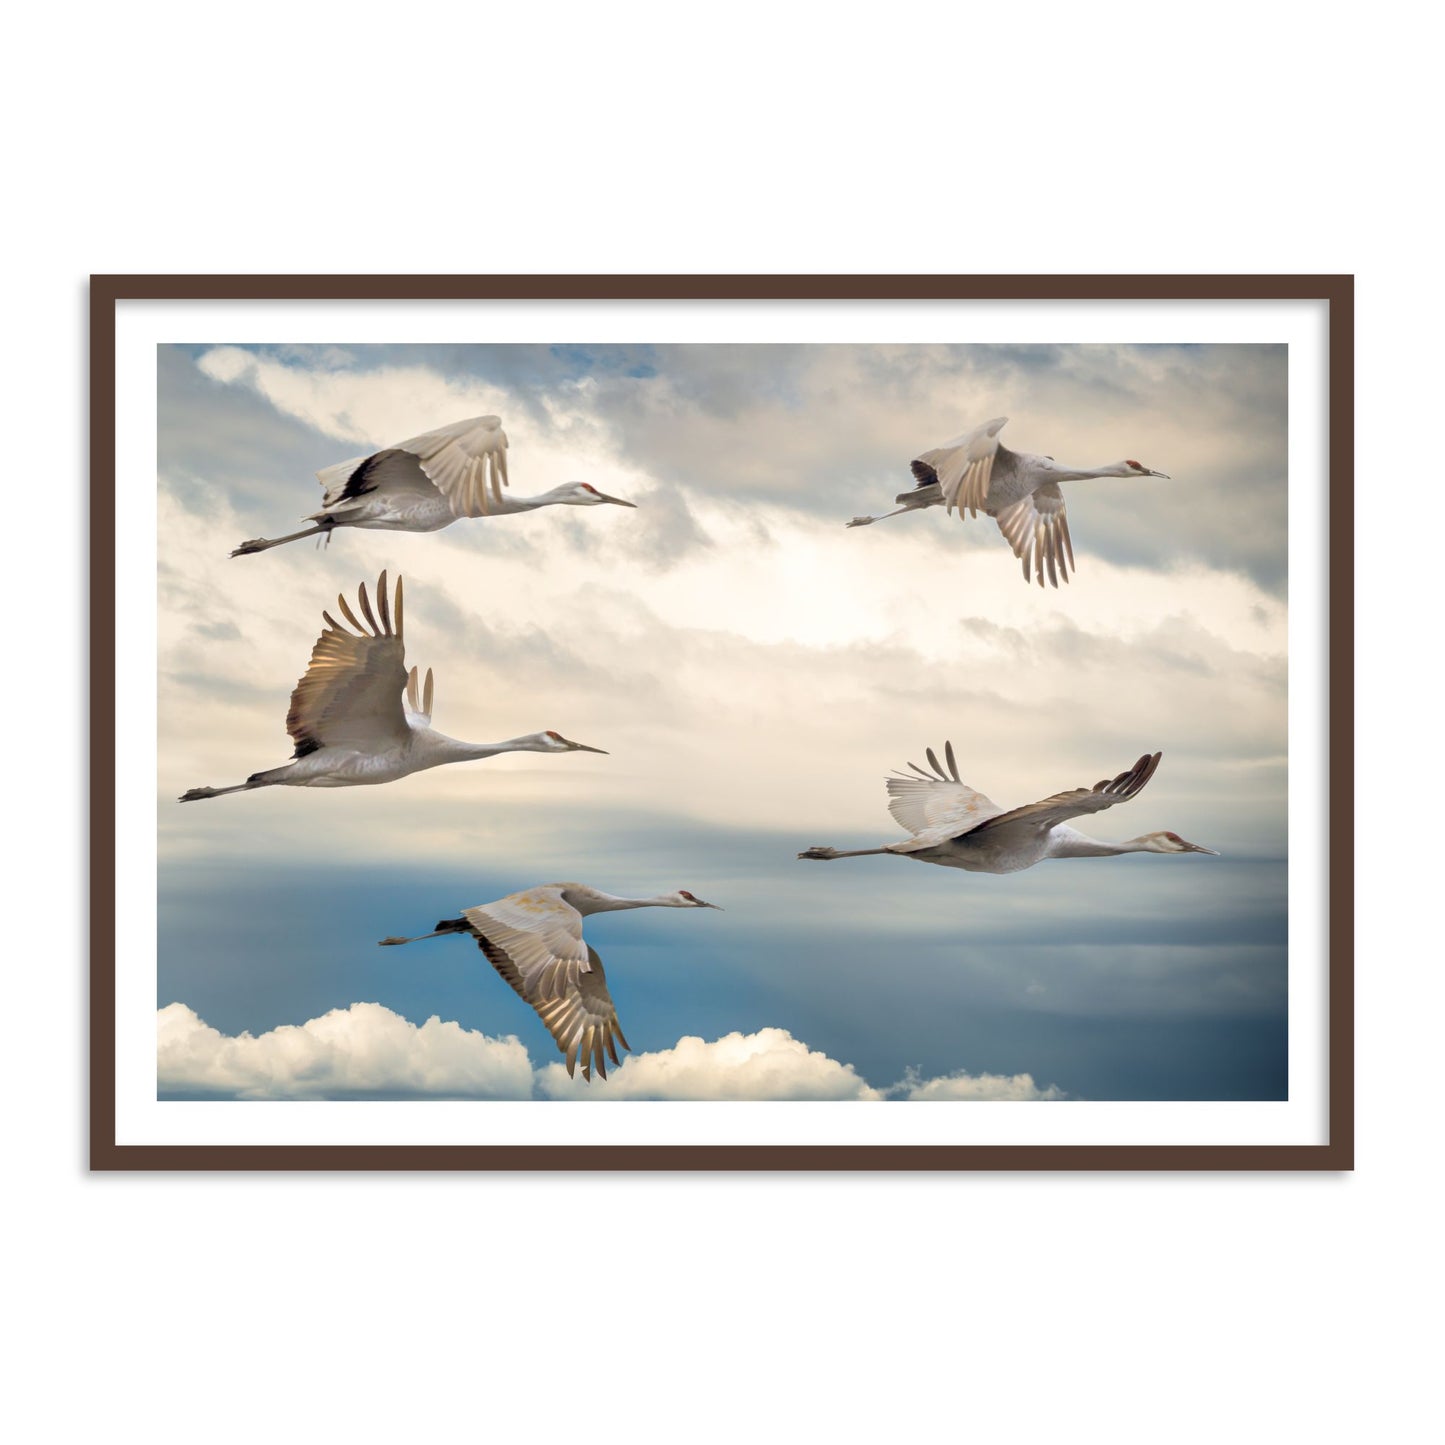 High Flying Birds in Clouds Vastu Painting for Wall Decor